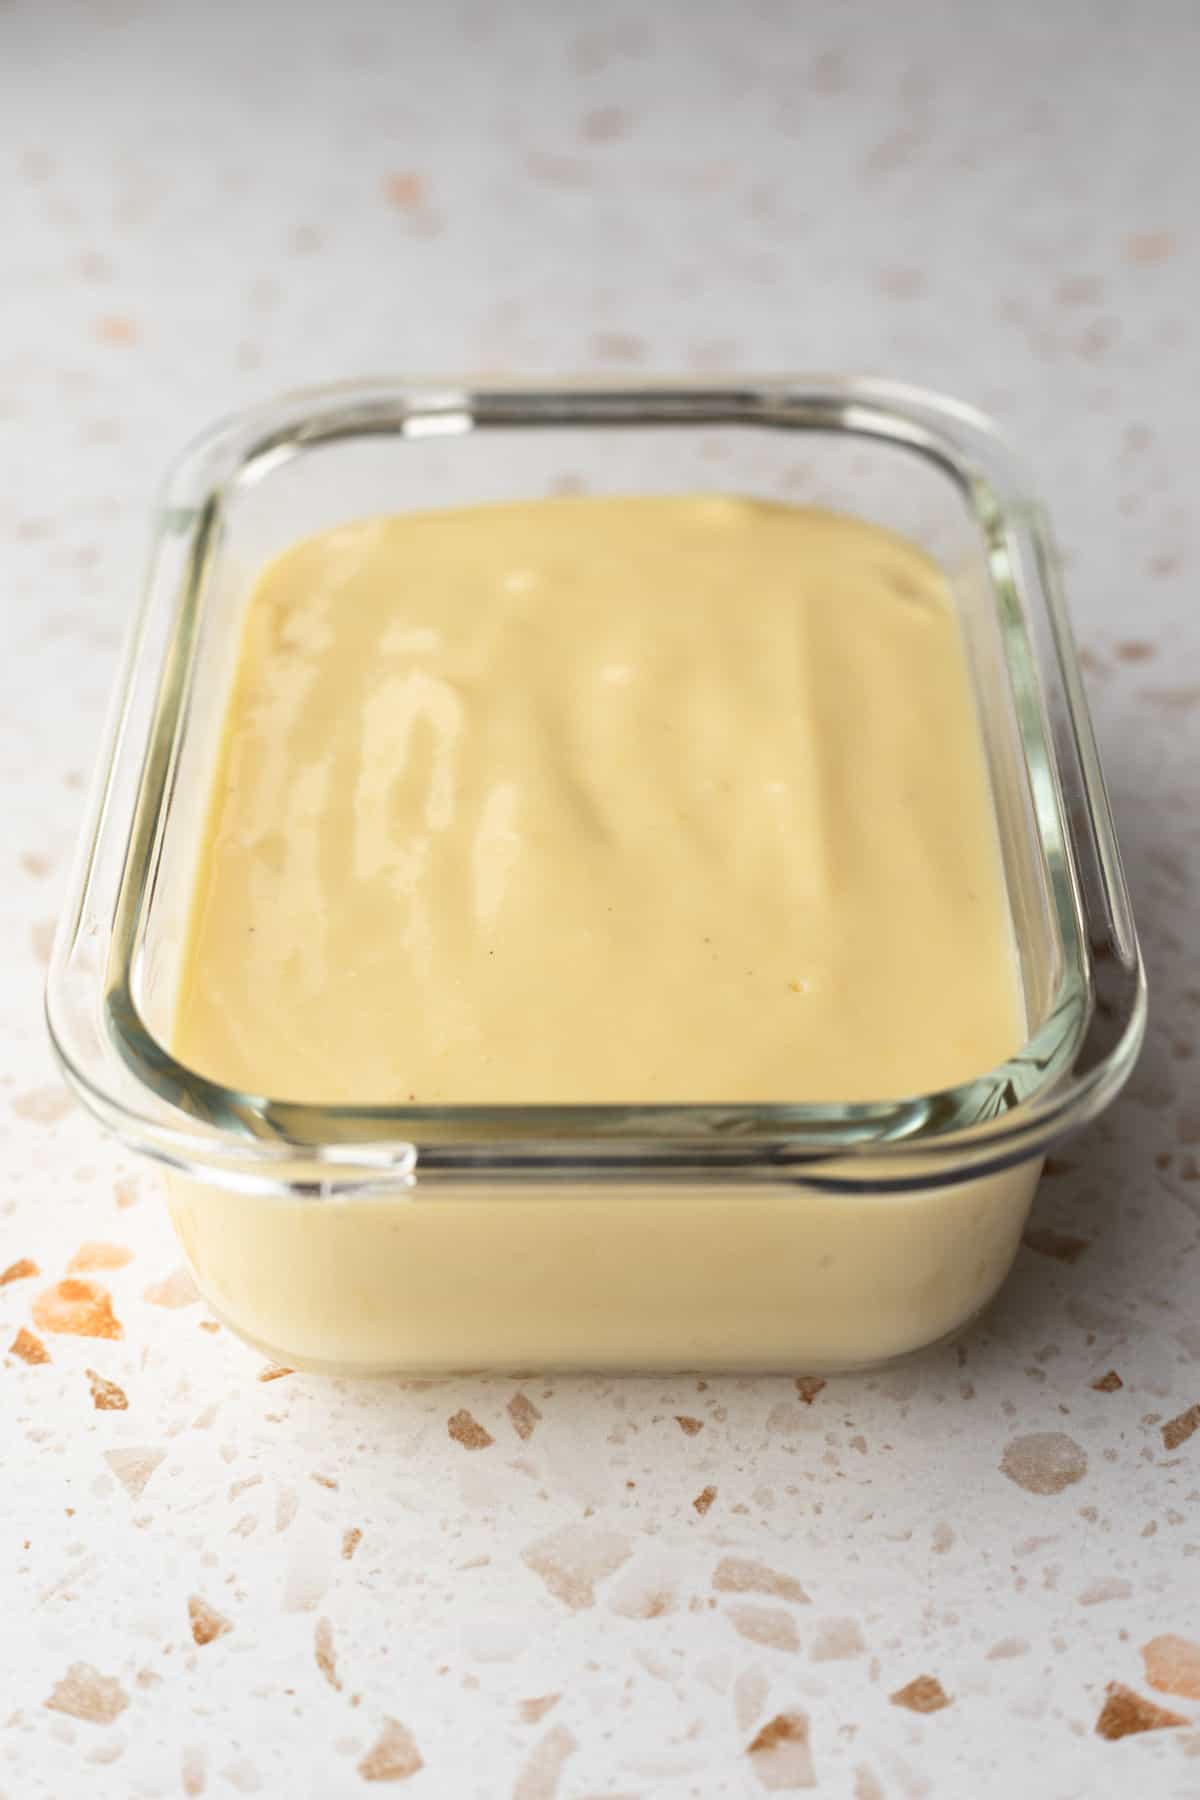 oil-free vegan buttery spread in a rectangular glass container.